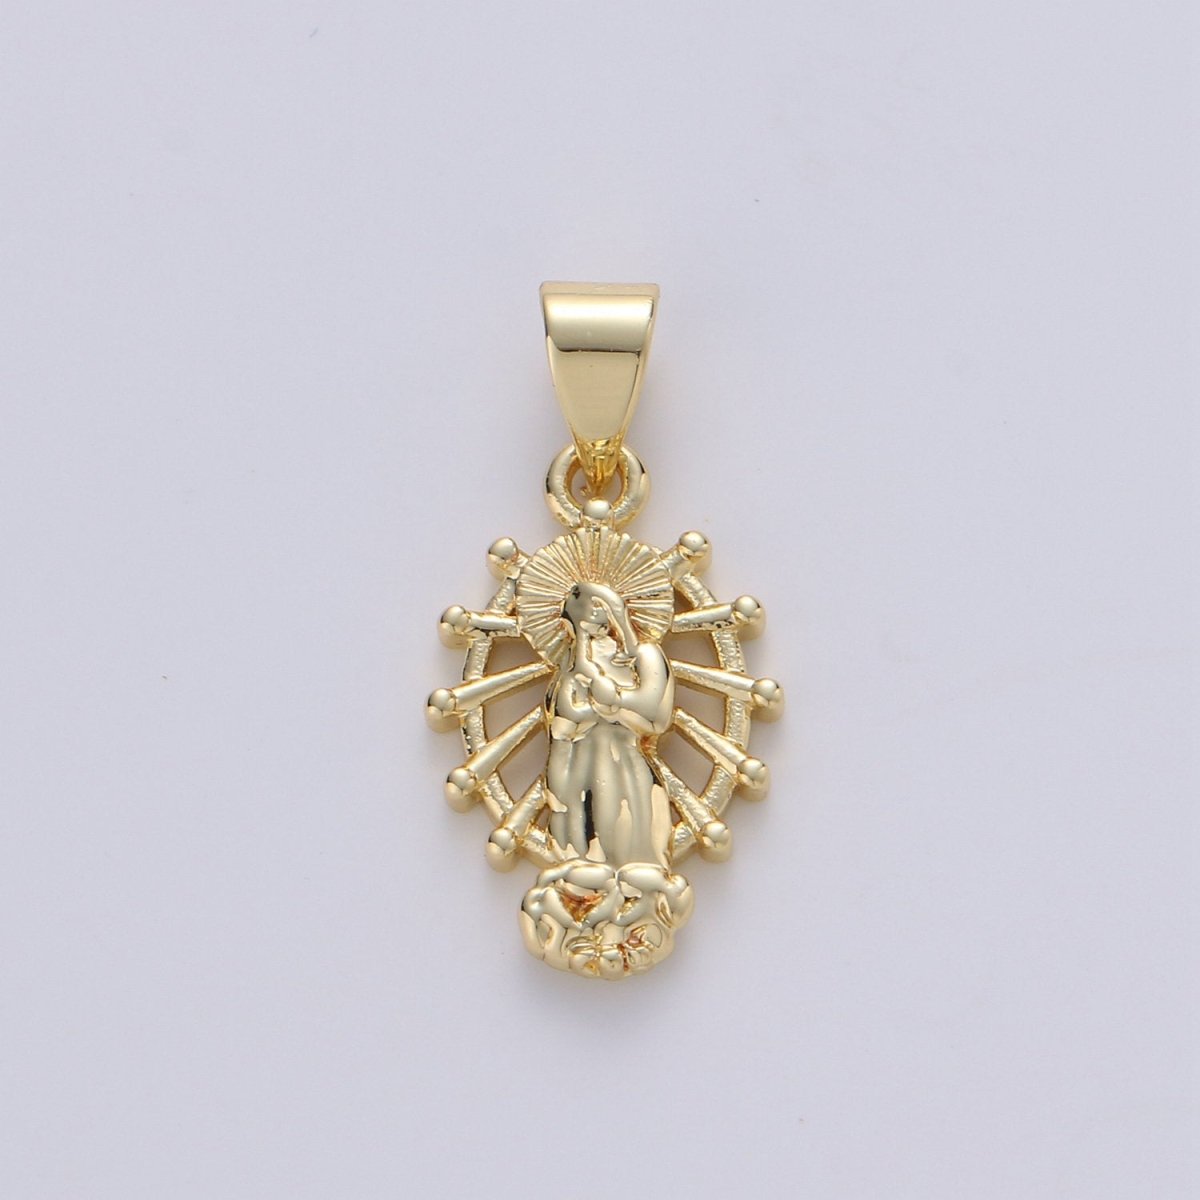 Dainty Charm 24k Gold Filled Virgin Mary Pendant, Lady Guadalupe Oval Charm, Mother of Jesus Medallion Pendant Necklace I-914 - DLUXCA